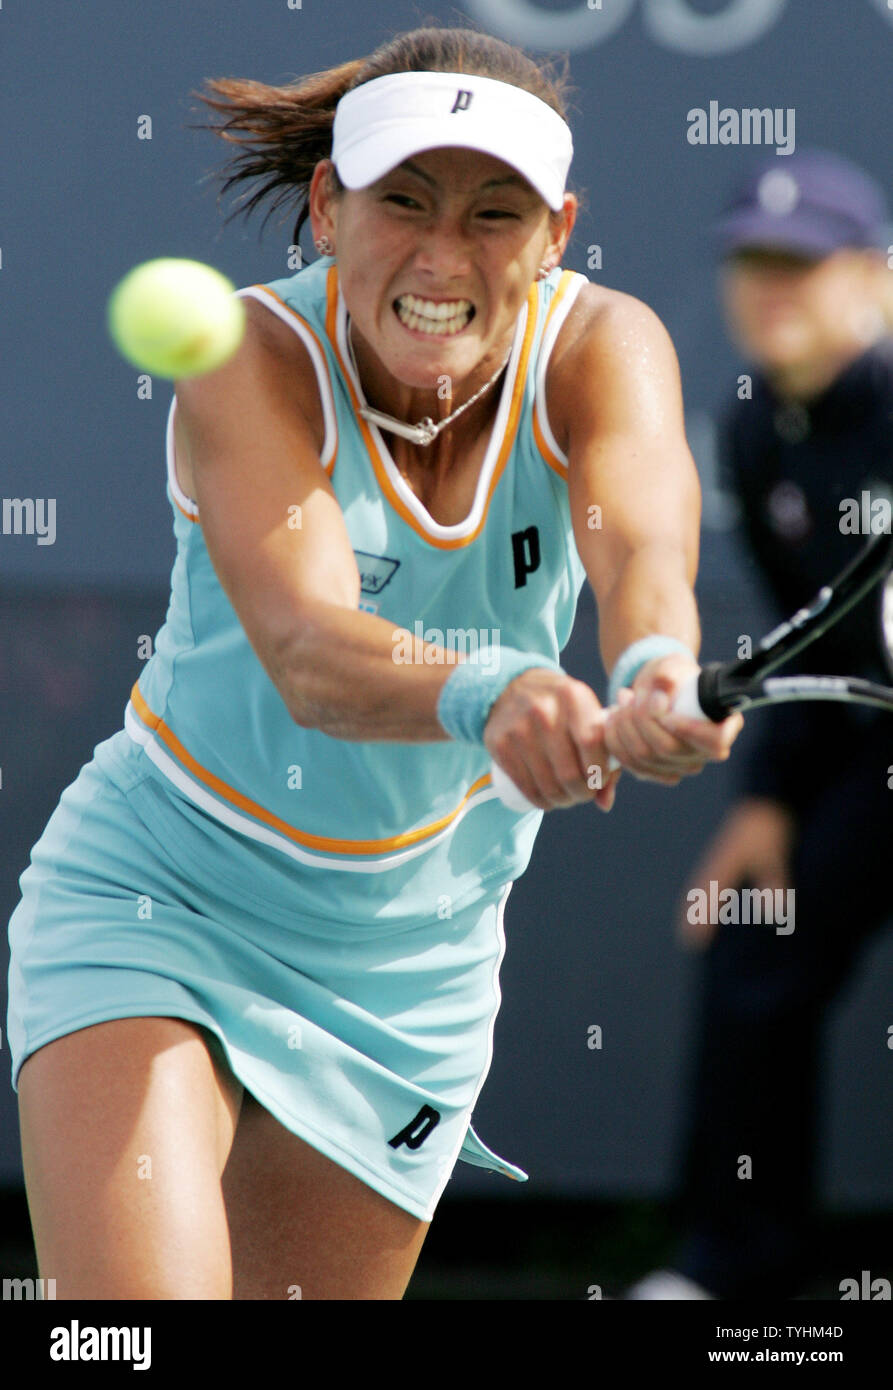 Ai Sugiyama of Japan returns the ball to Tathiana Garbin of Italy in the second set of play at the US Open held at the USTA Billie Jean King National Tennis Center on August 31, 2006 in New York. (UPI Photo/Monika Graff) Stock Photo